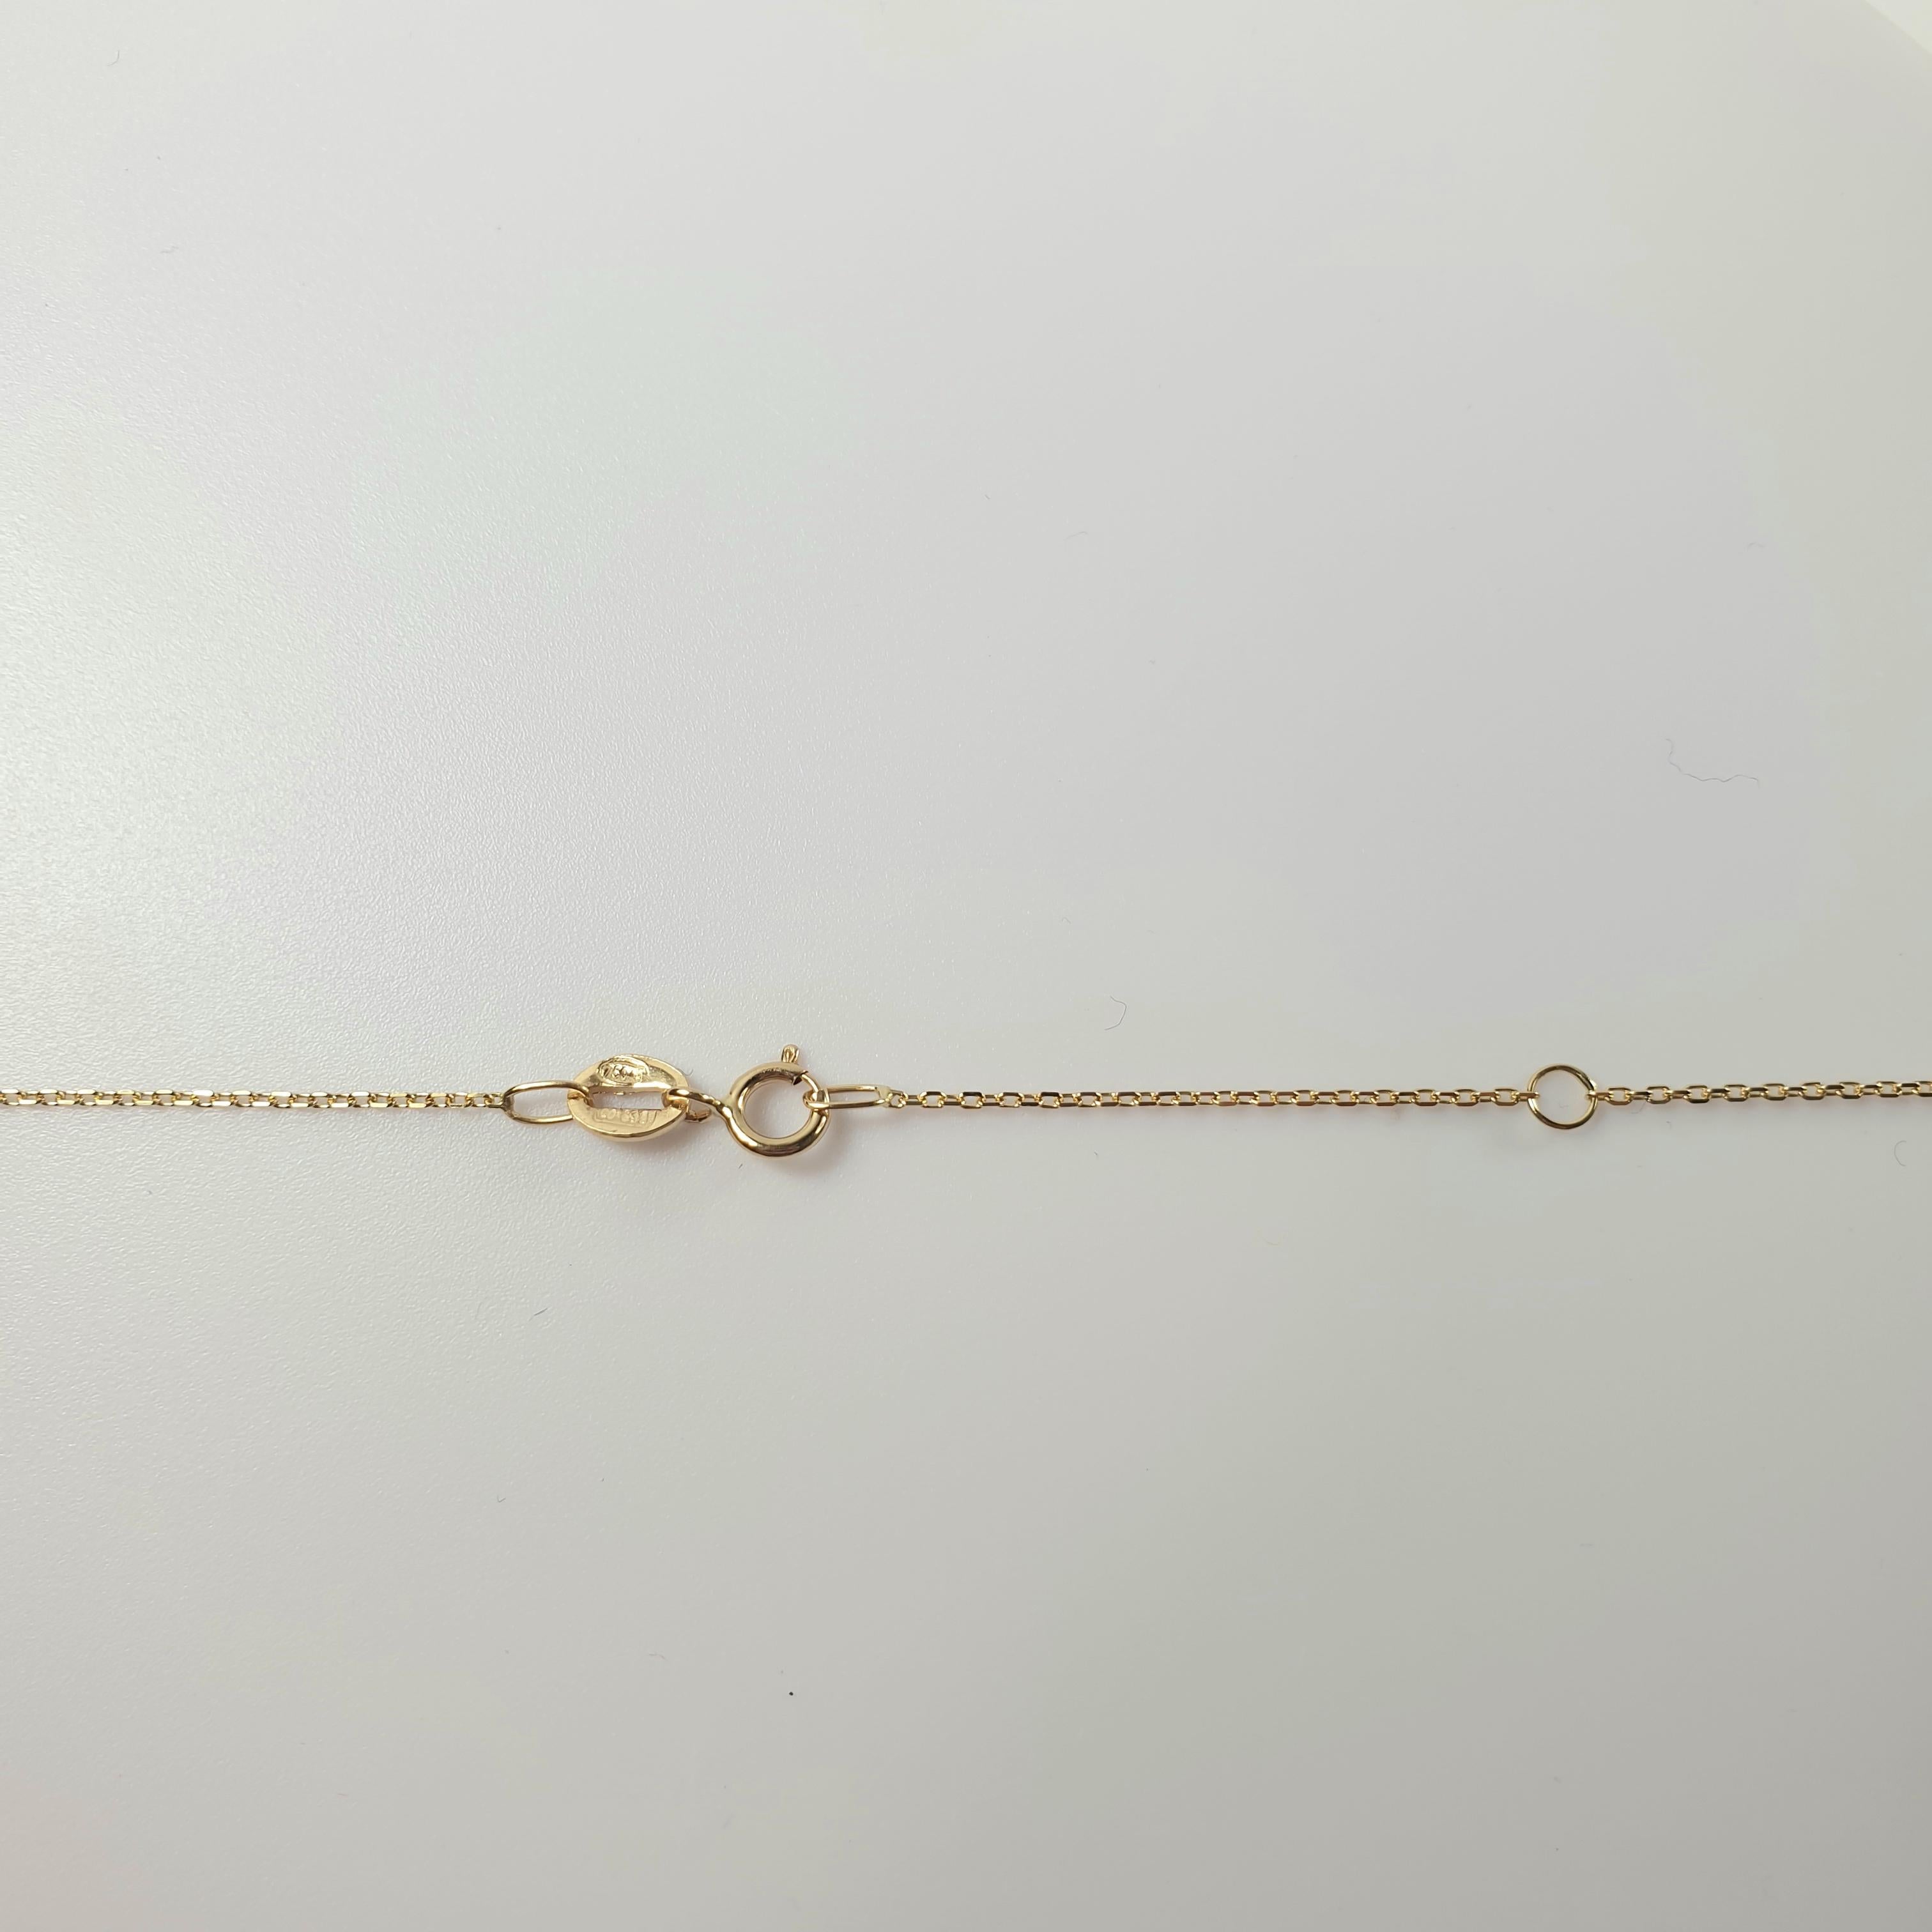 Women's 18 Karat Yellow Gold Necklace with Gold Tie-Shaped Pendant and Diamonds For Sale